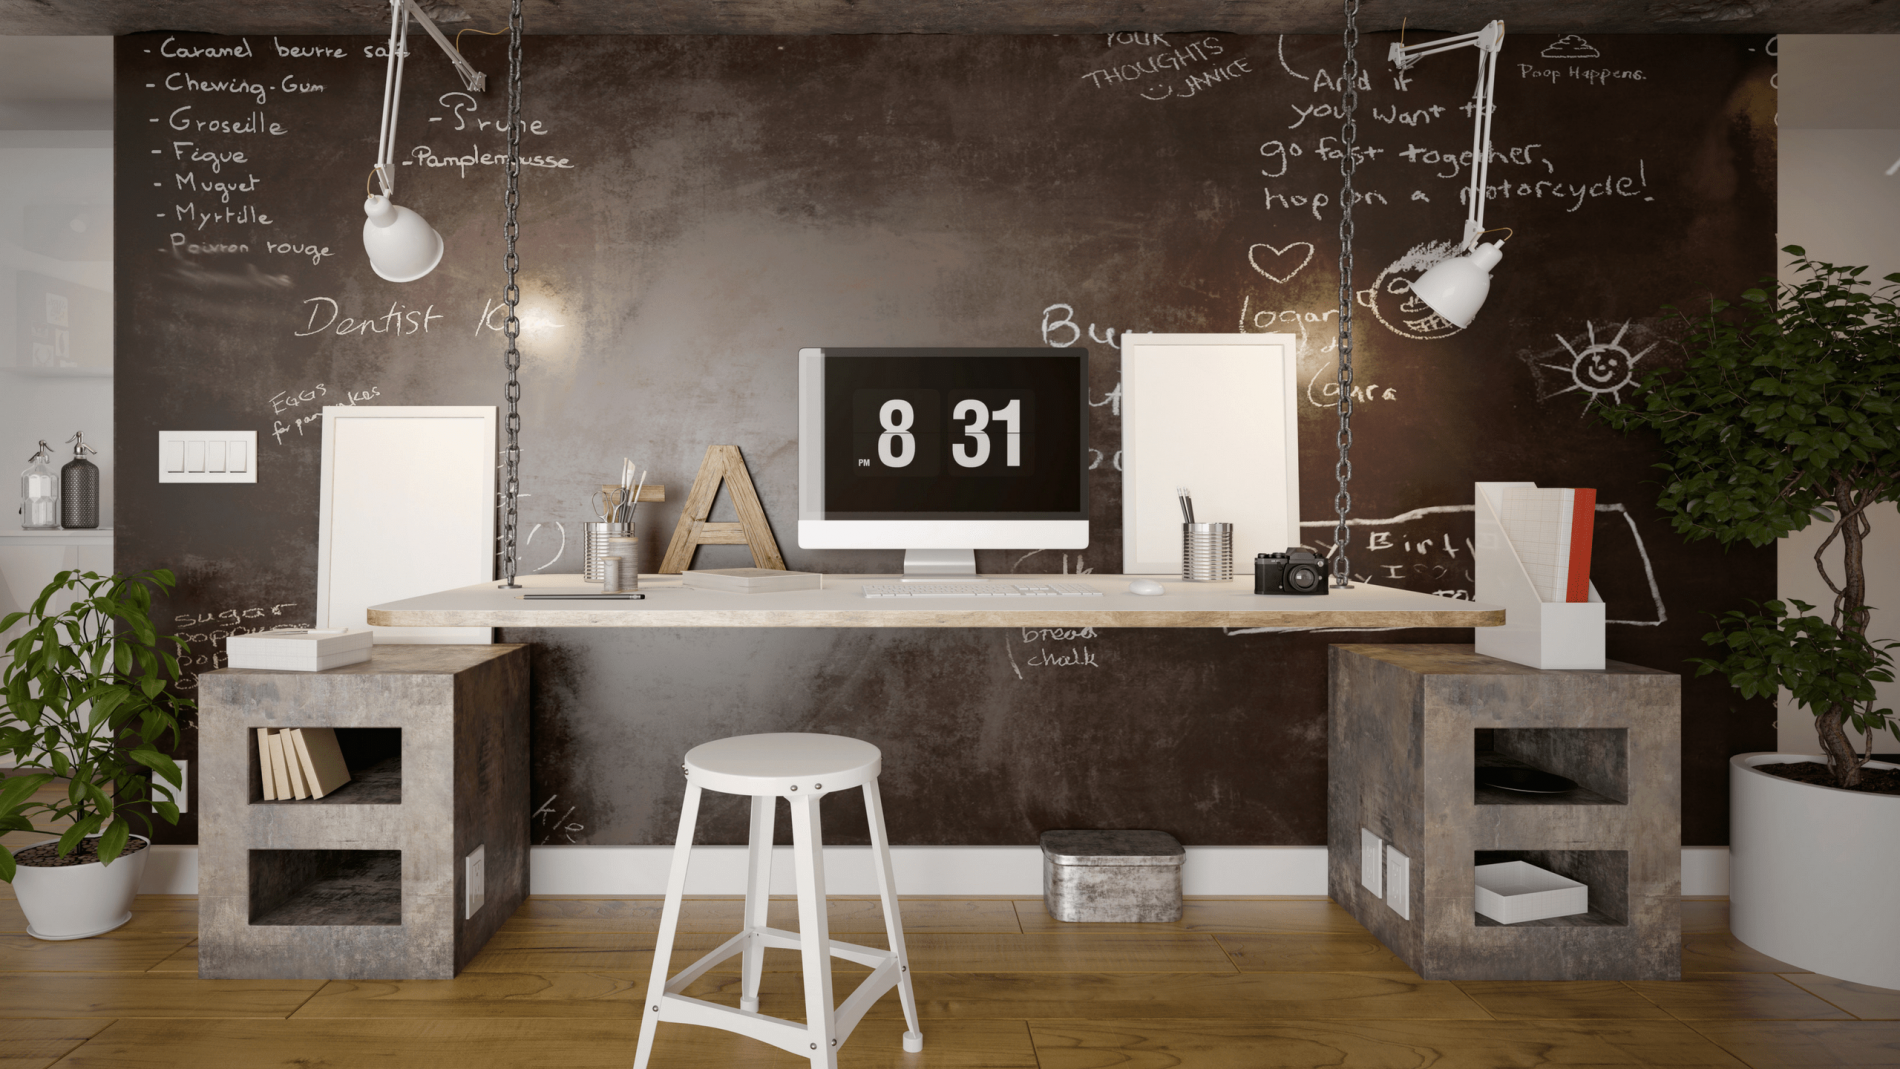 Follow these three tips to create the perfect home office